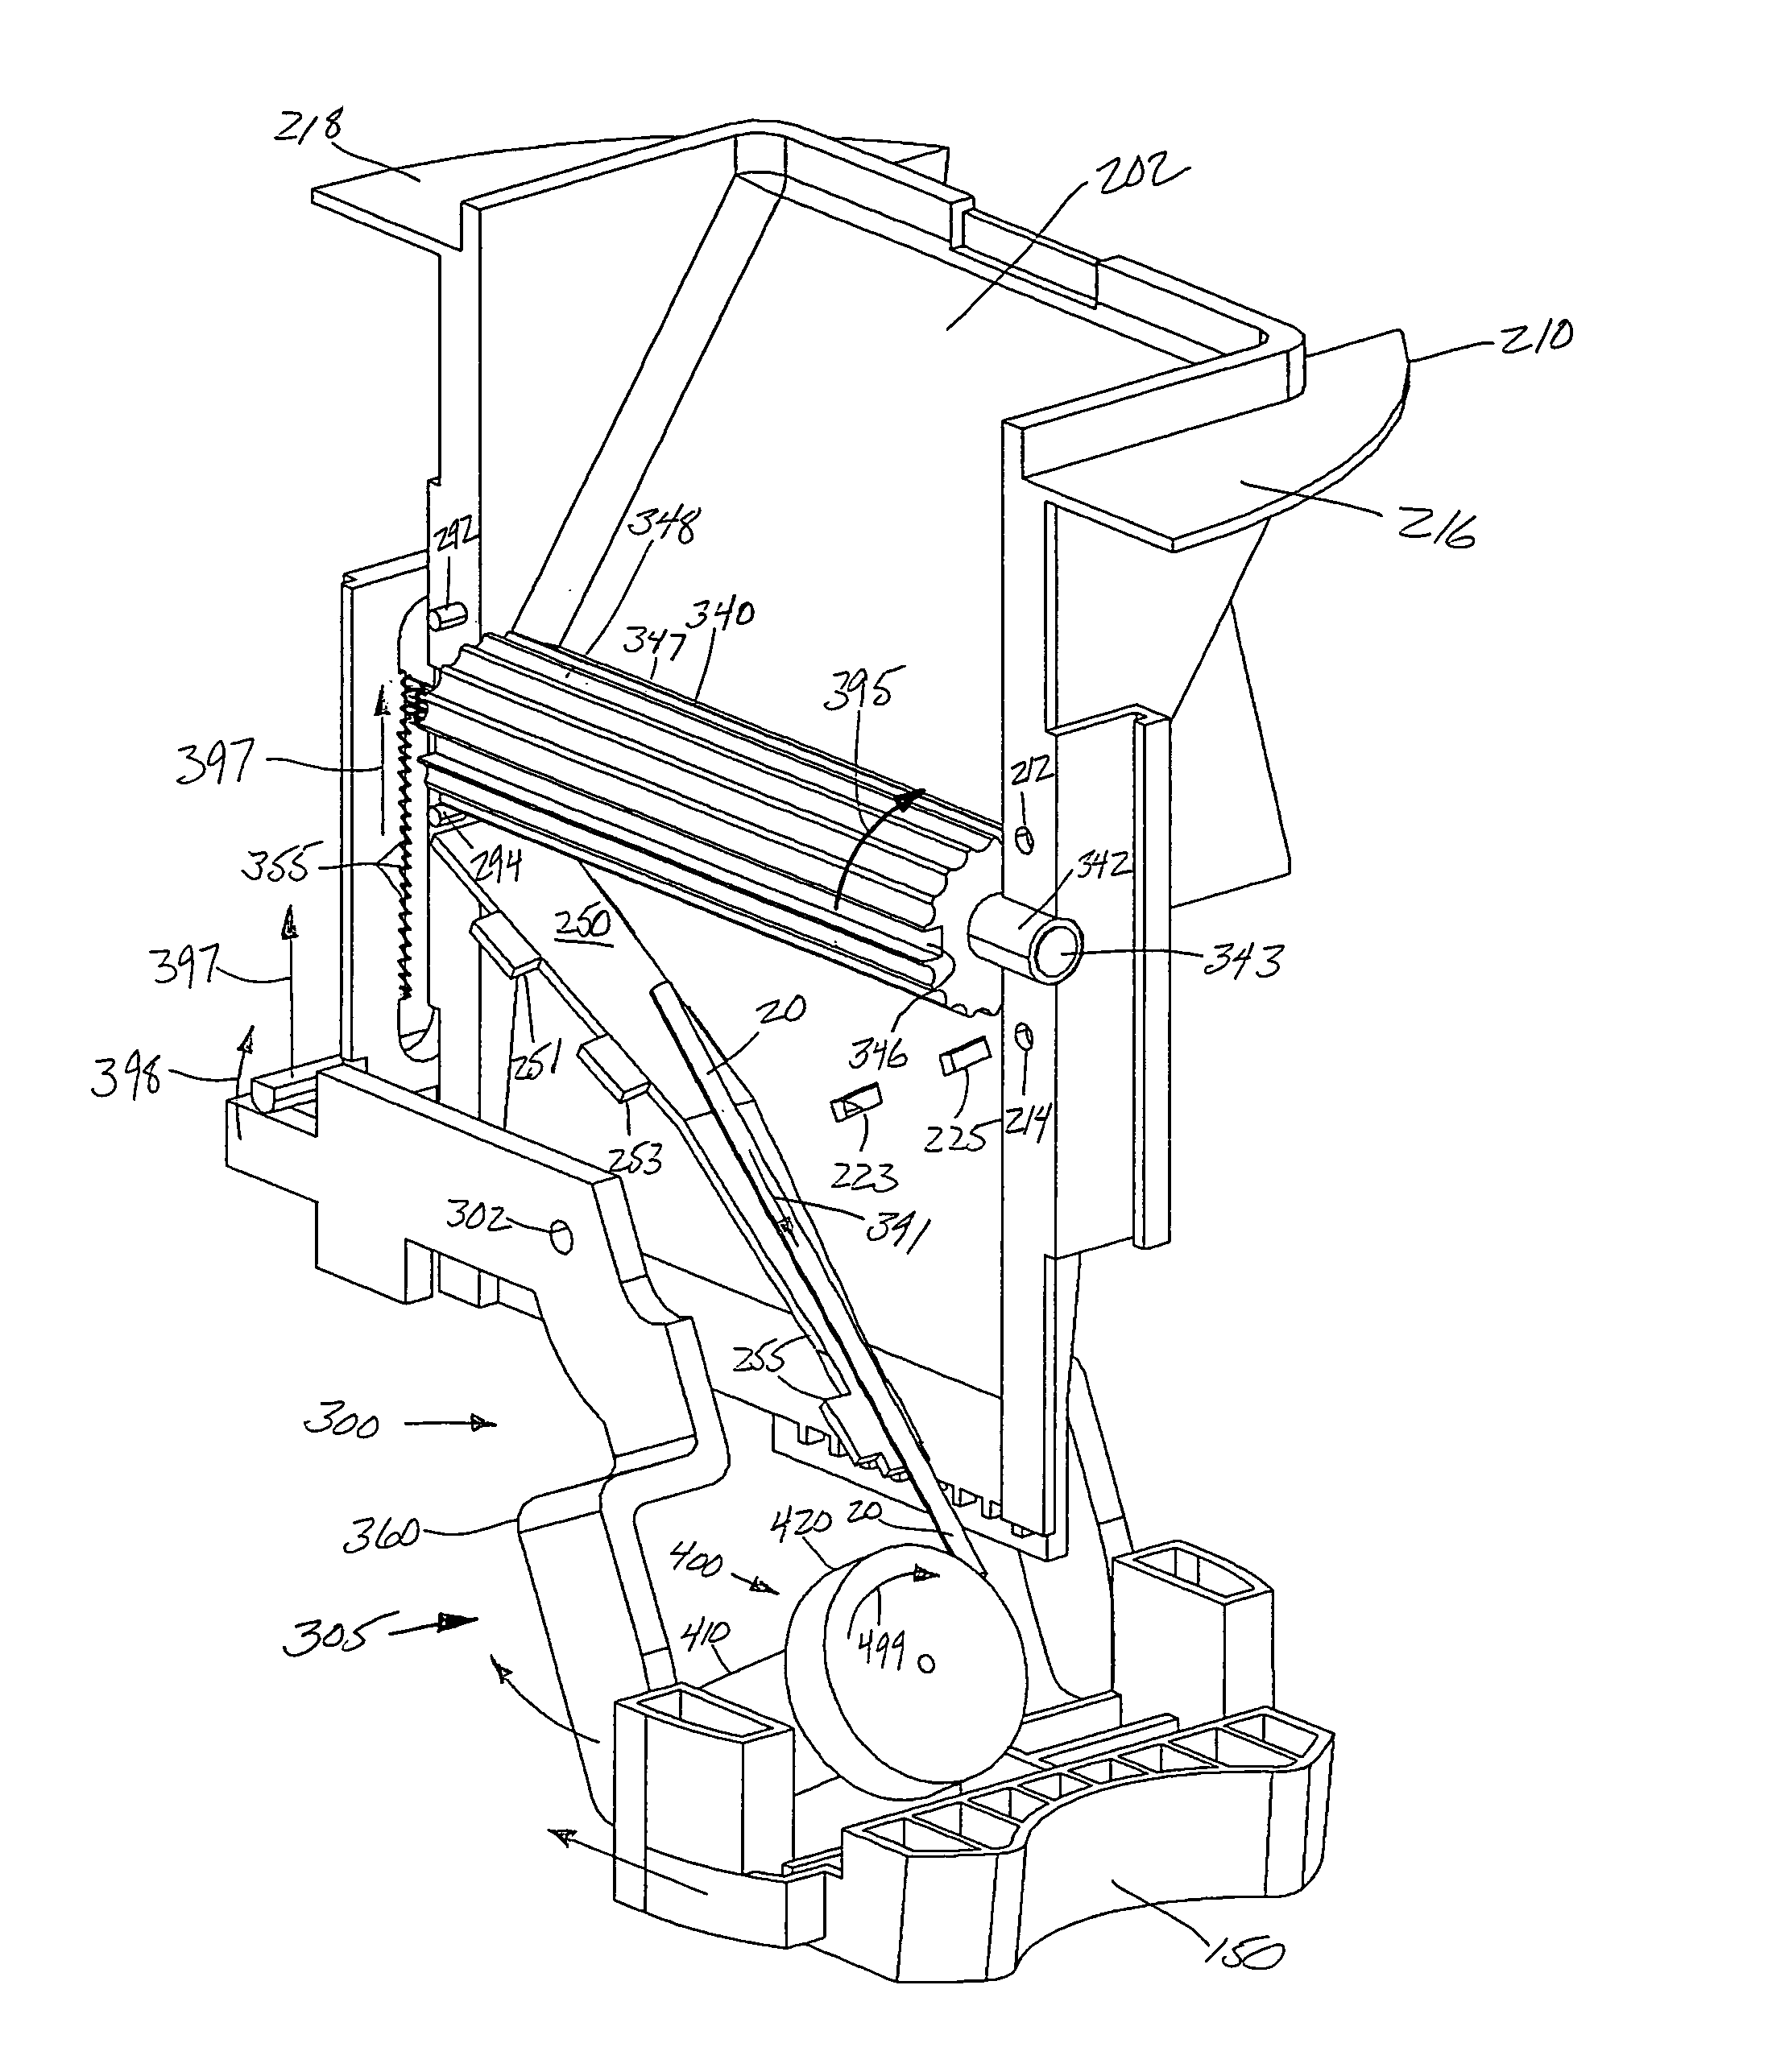 Dispenser apparatus and packaging to inhibit propagation of hand-borne pathogens